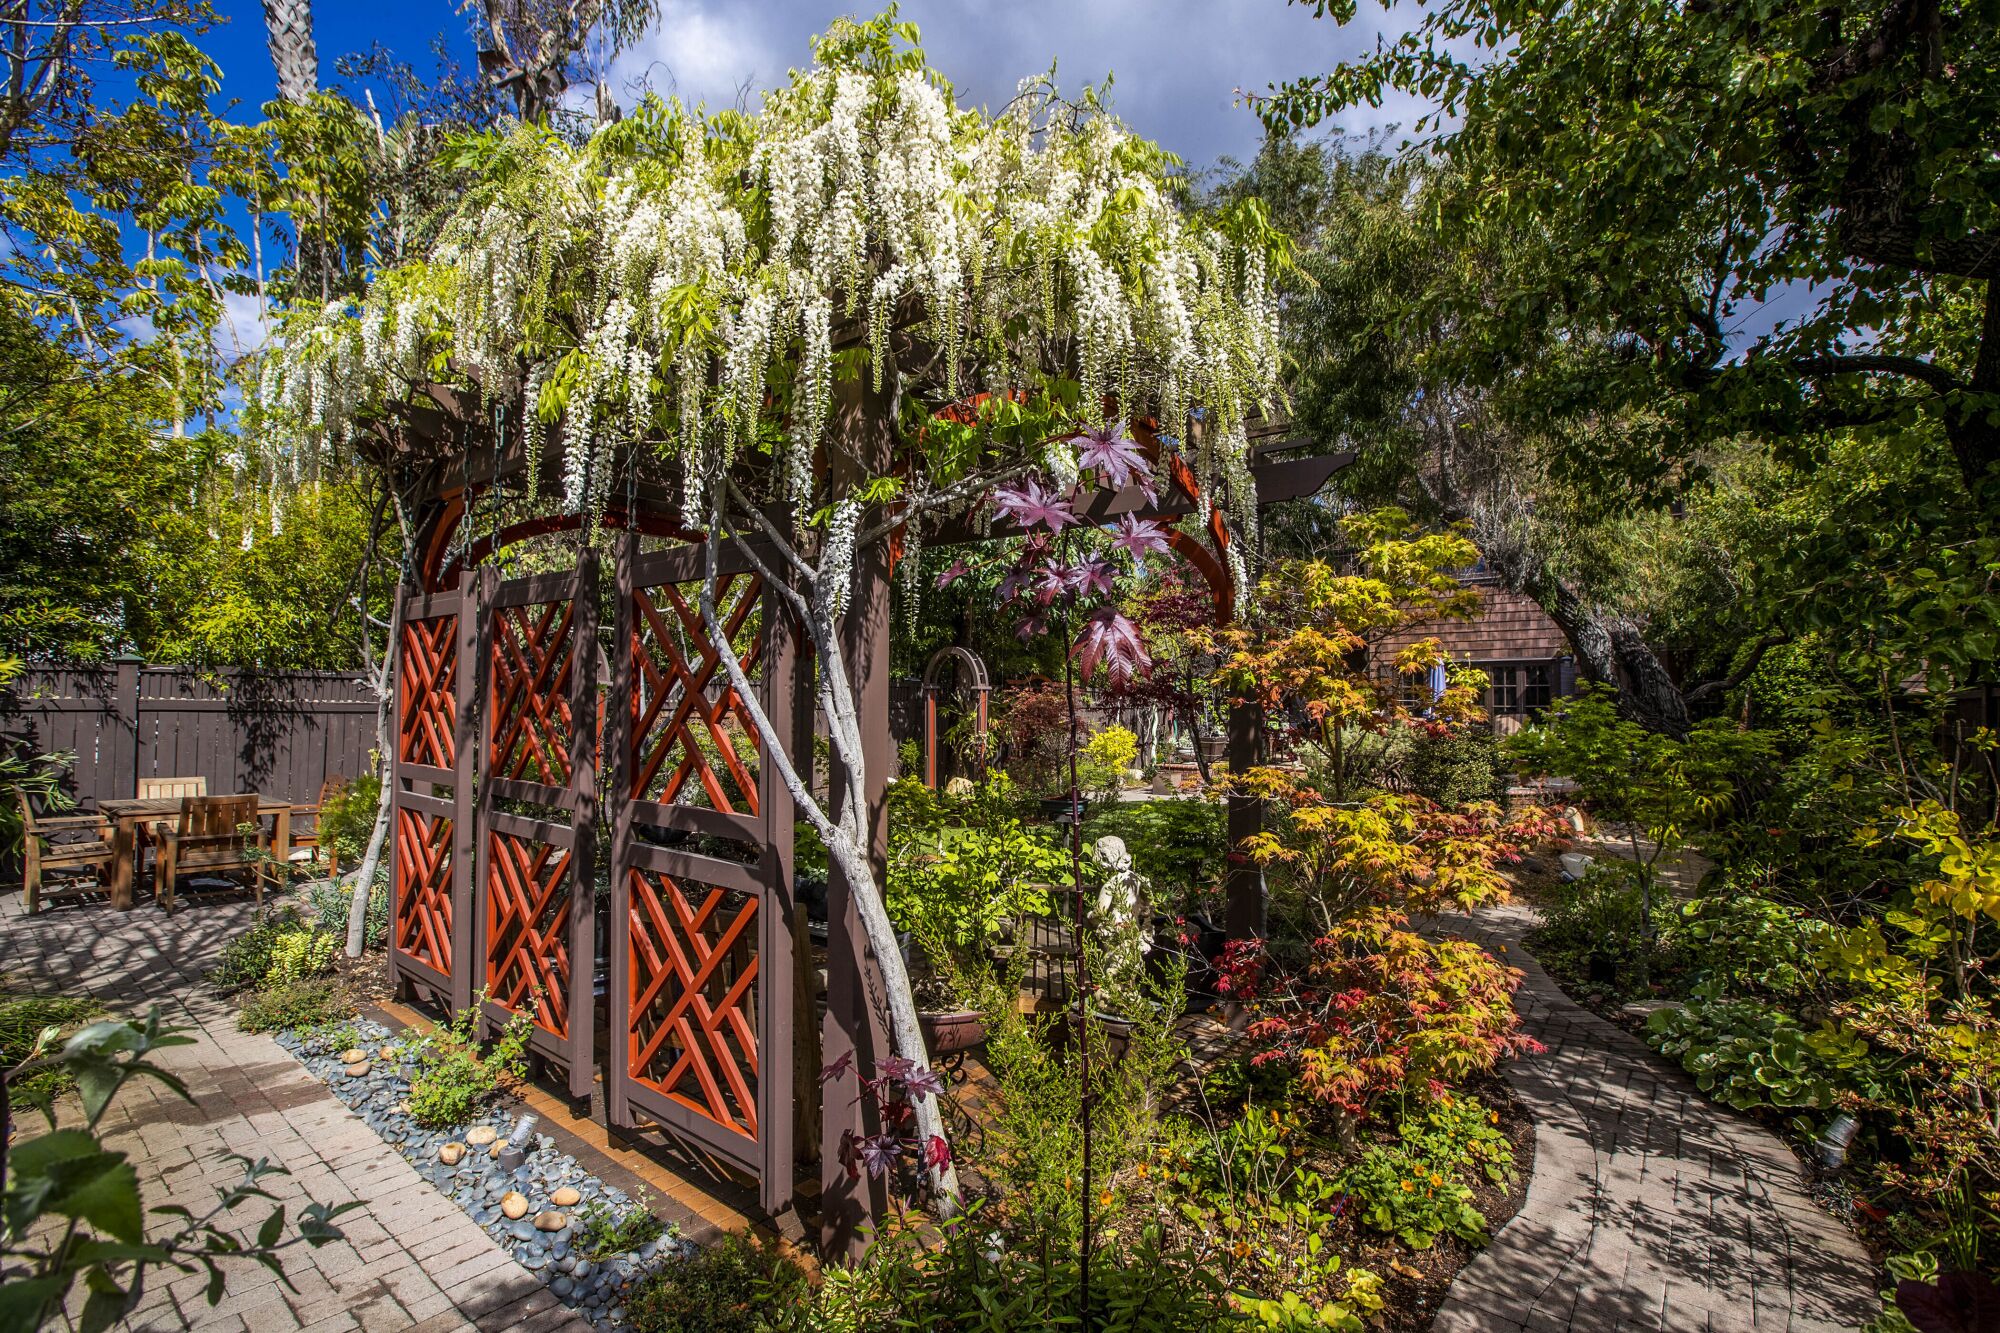 A pergola covered with wisteria and surrounded by flowers